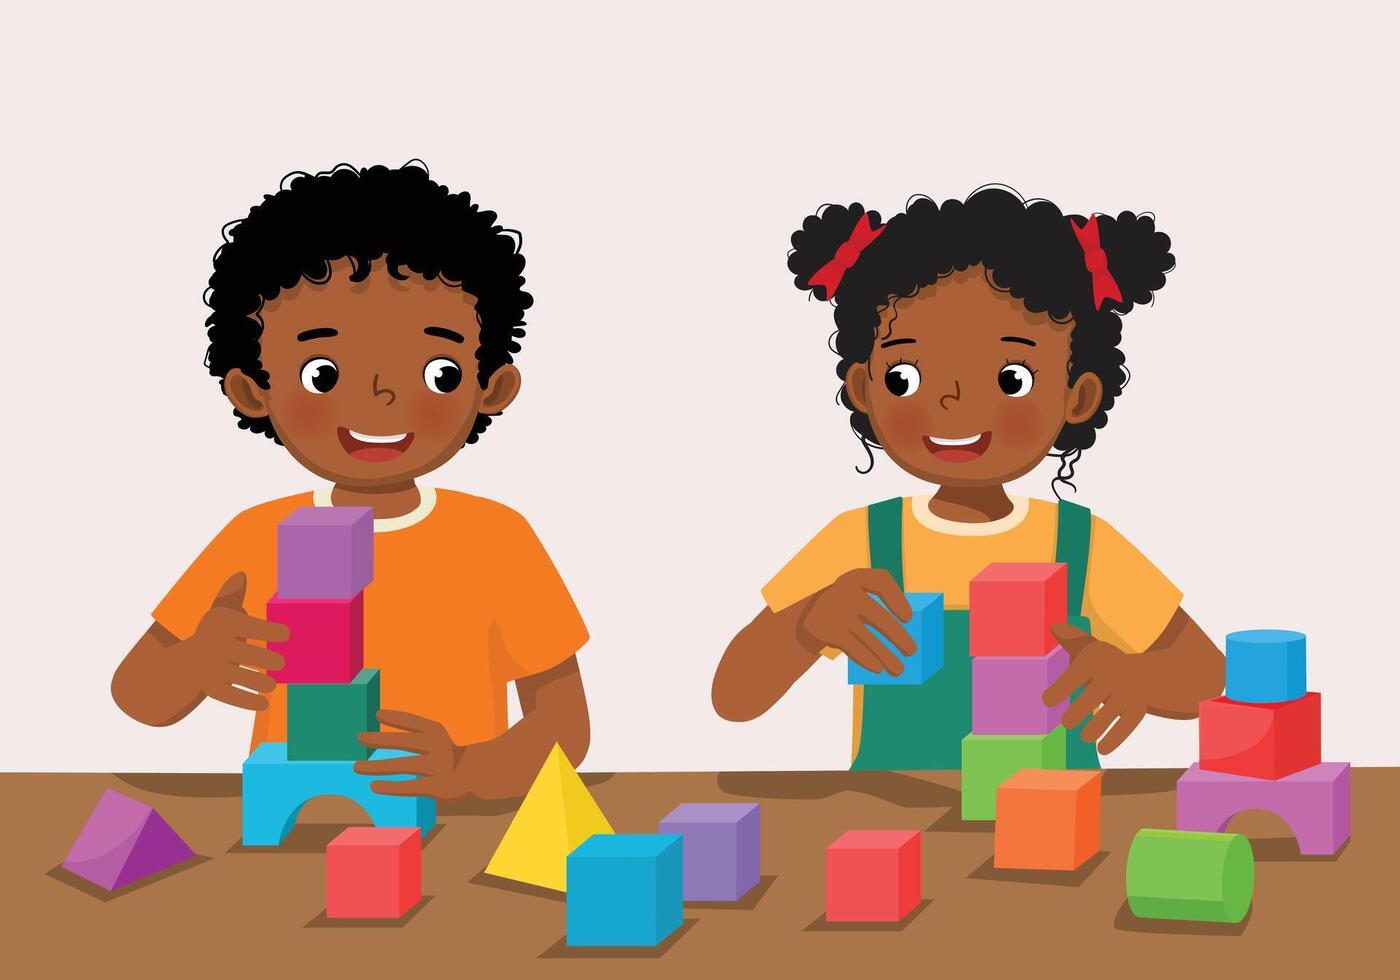 Cute little African kids boy and girl playing colorful wooden brick block toys together at the table vector